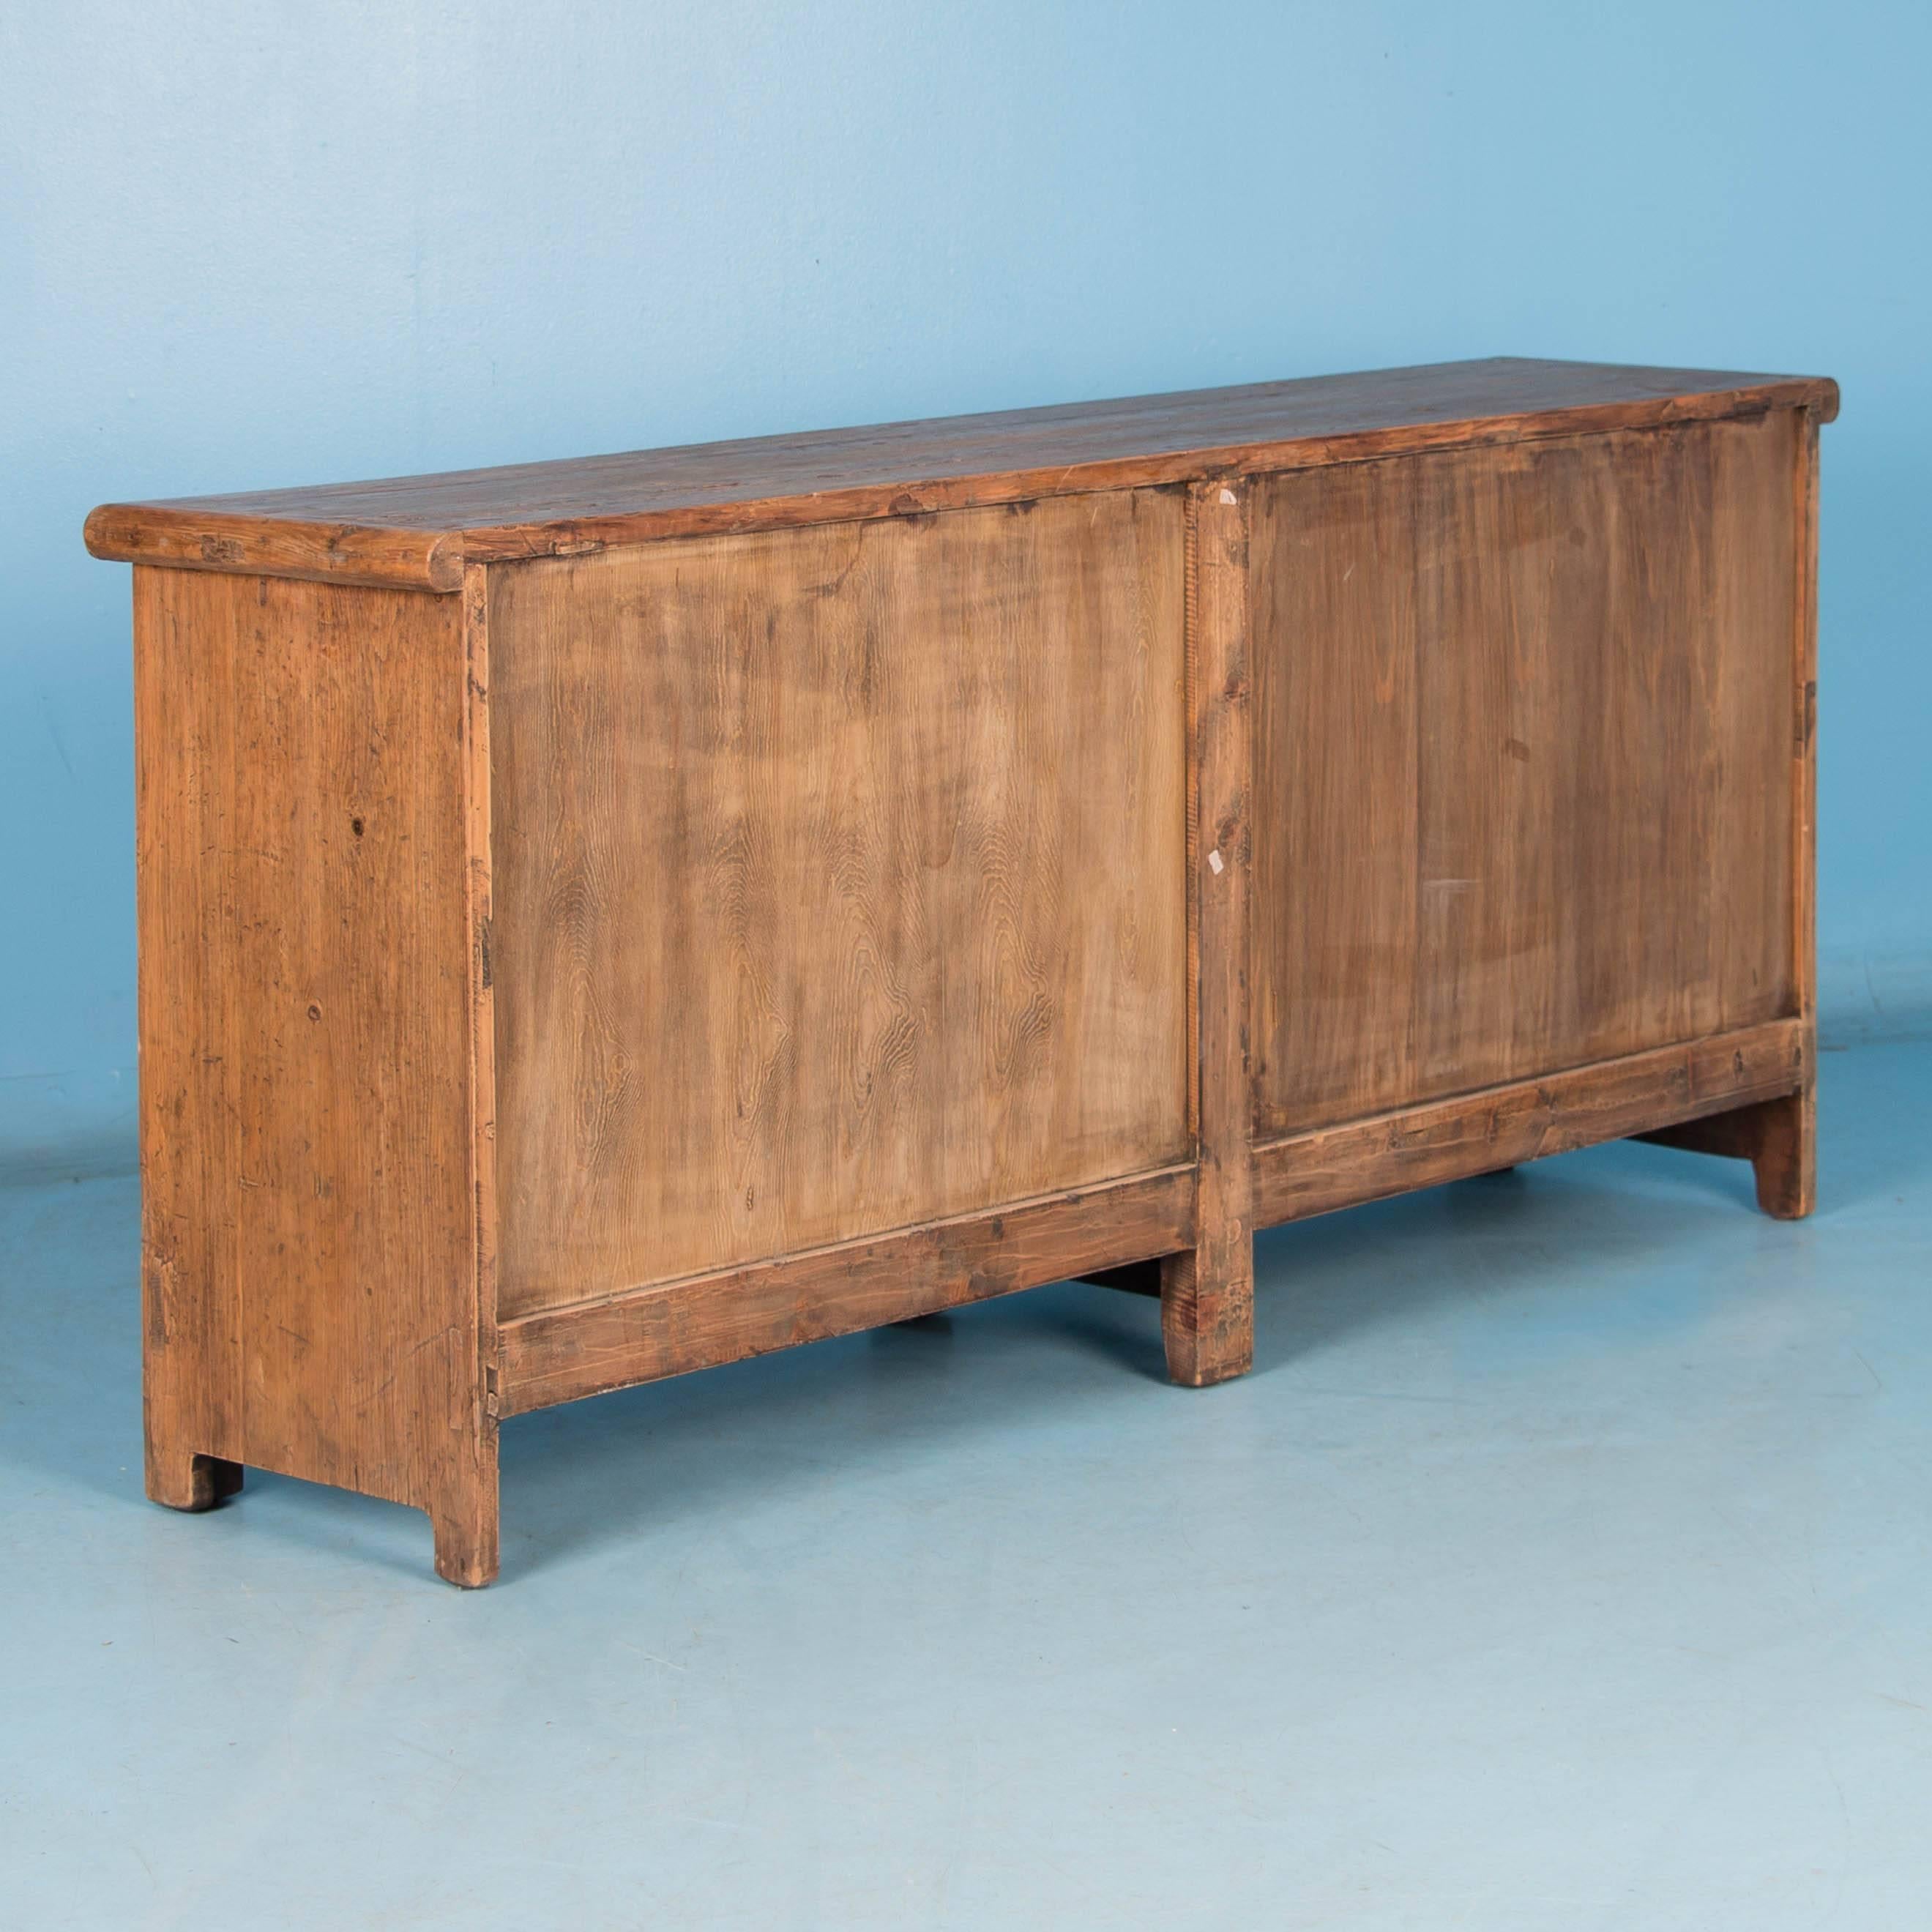 19th Century Antique Chinese Pine Sideboard with Lattice Work Doors